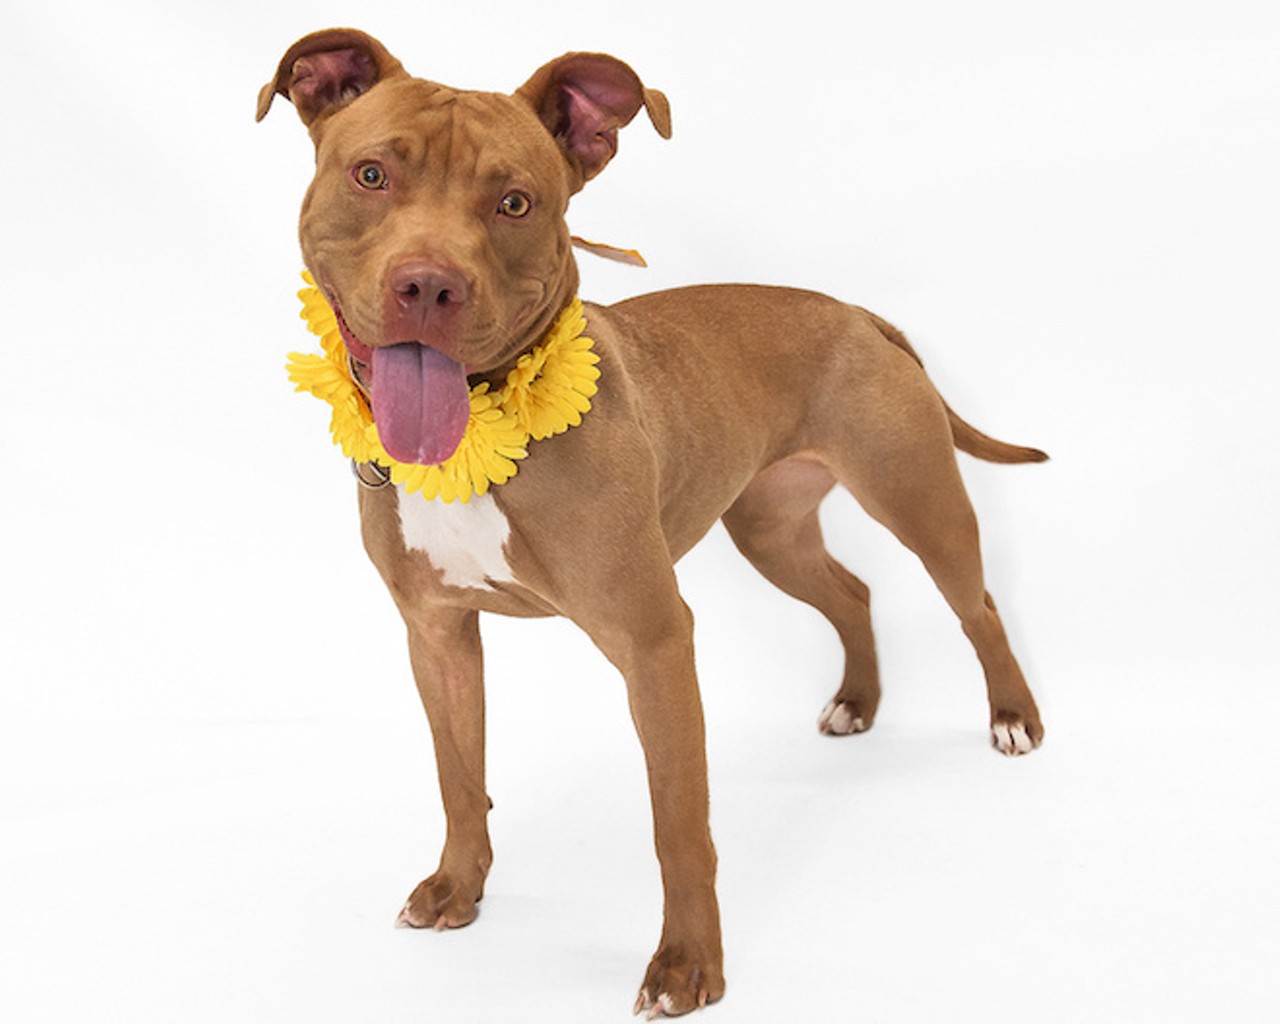 Kiss me, I'm adoptable: 16 adorable dogs looking for homes right now